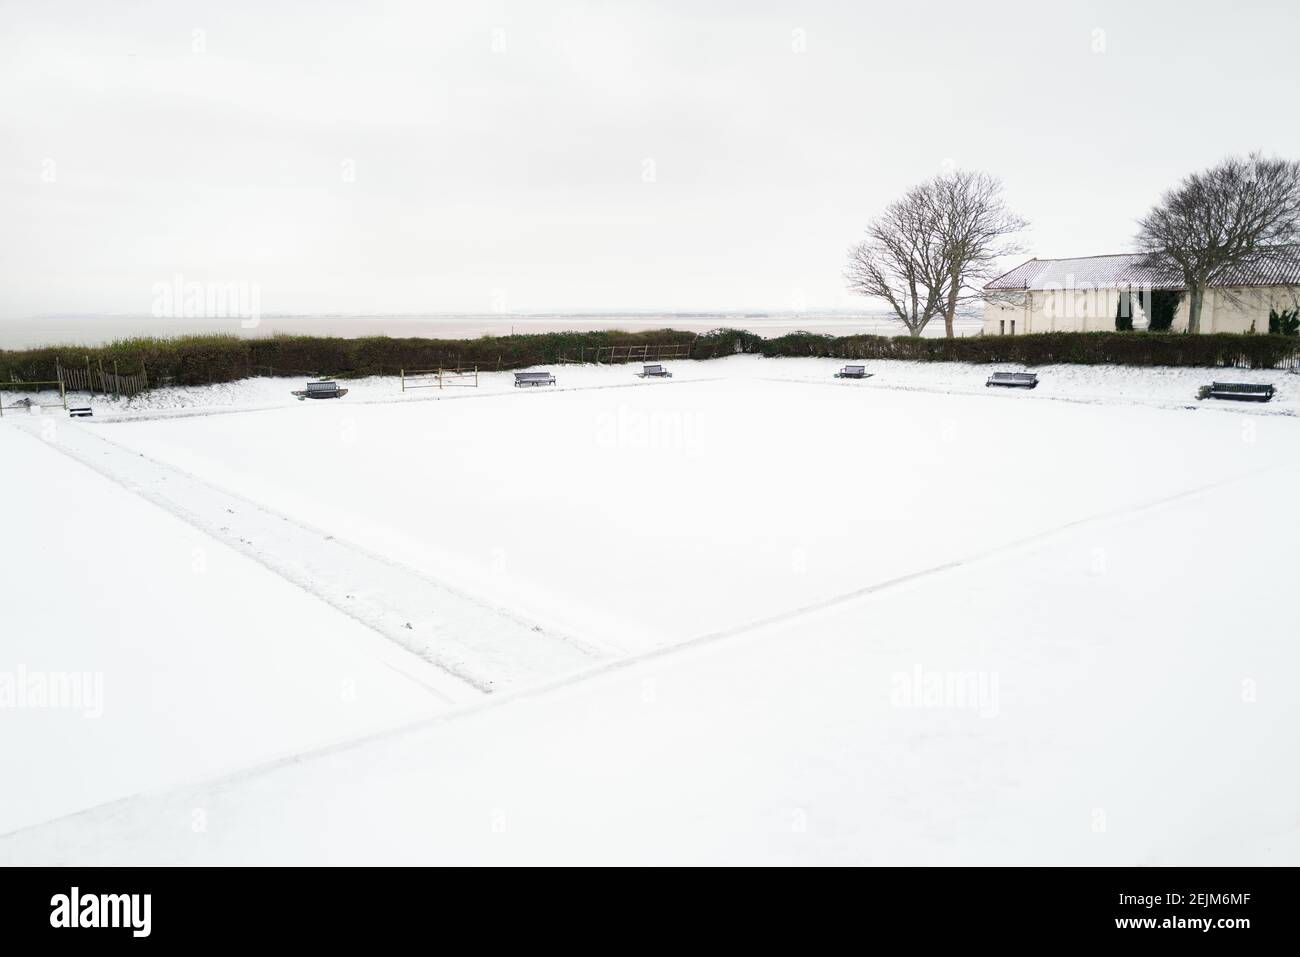 Benches around an outdoor bowling green out of season and covered in snow. Stock Photo